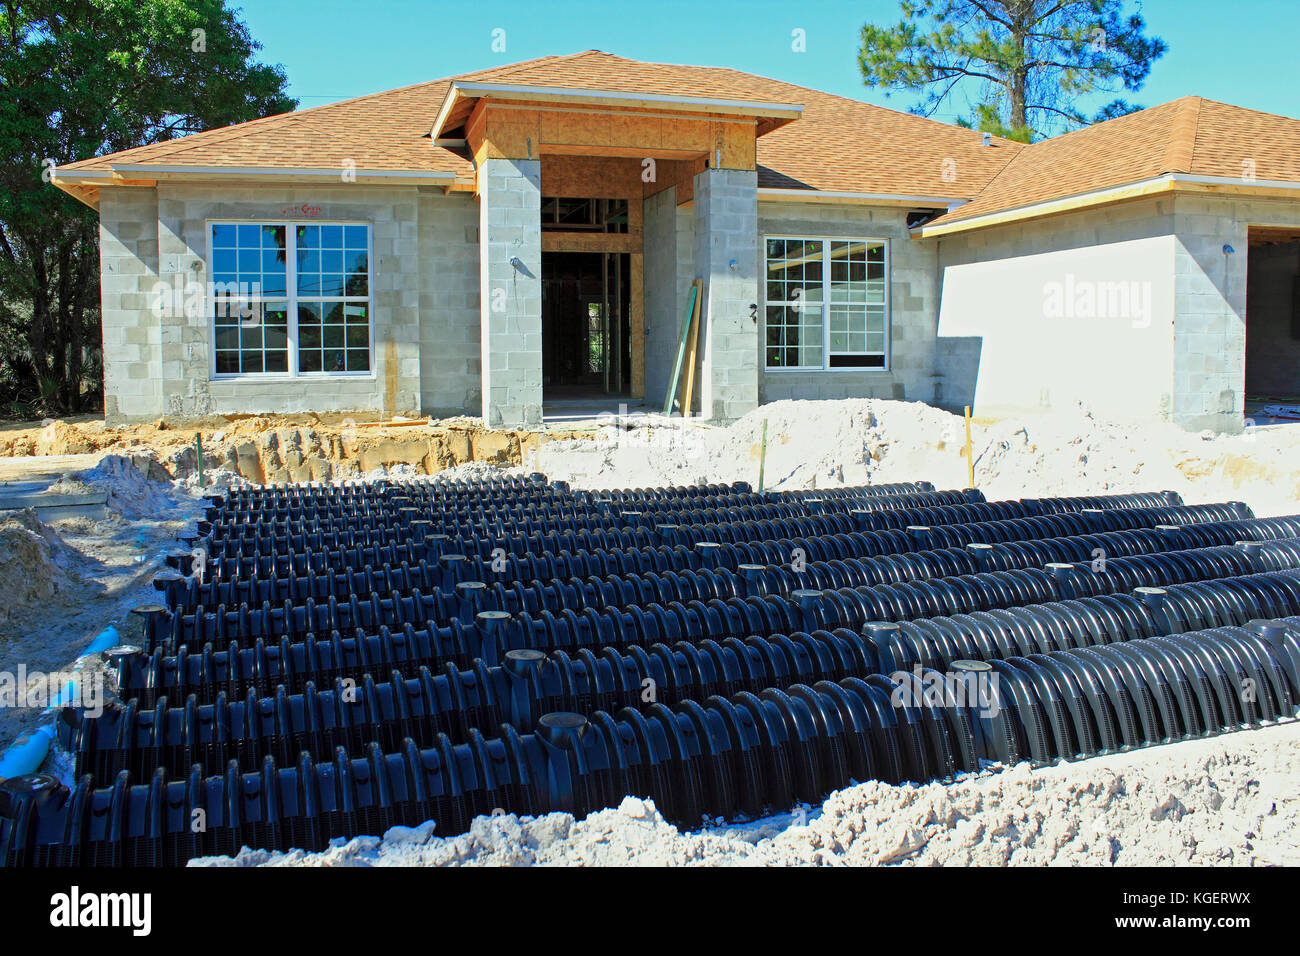 A home under construction in Florida showing the septic system disposal field Stock Photo